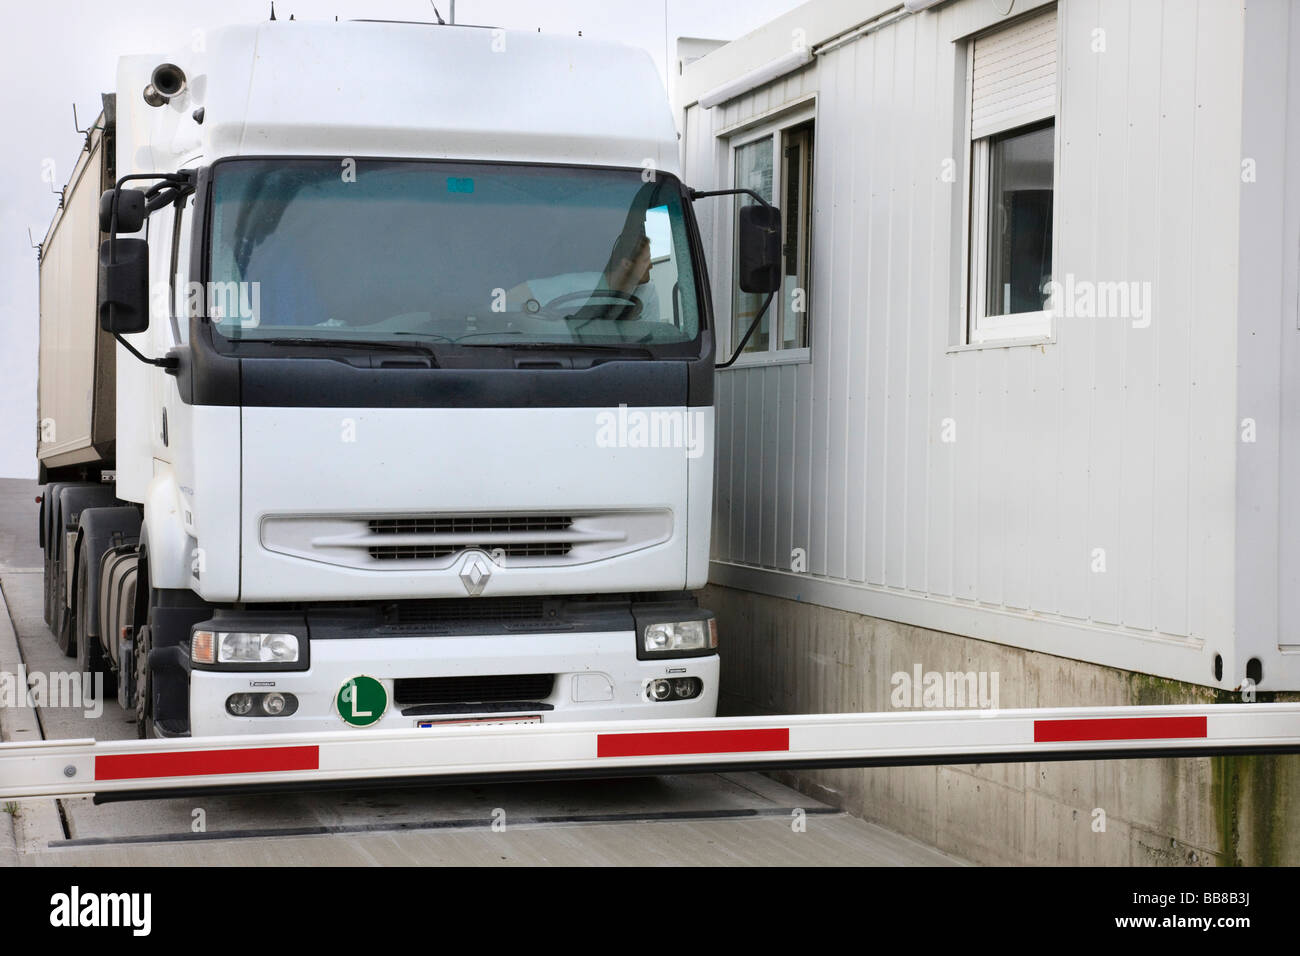 Truck at a control point of an industrial plant Stock Photo